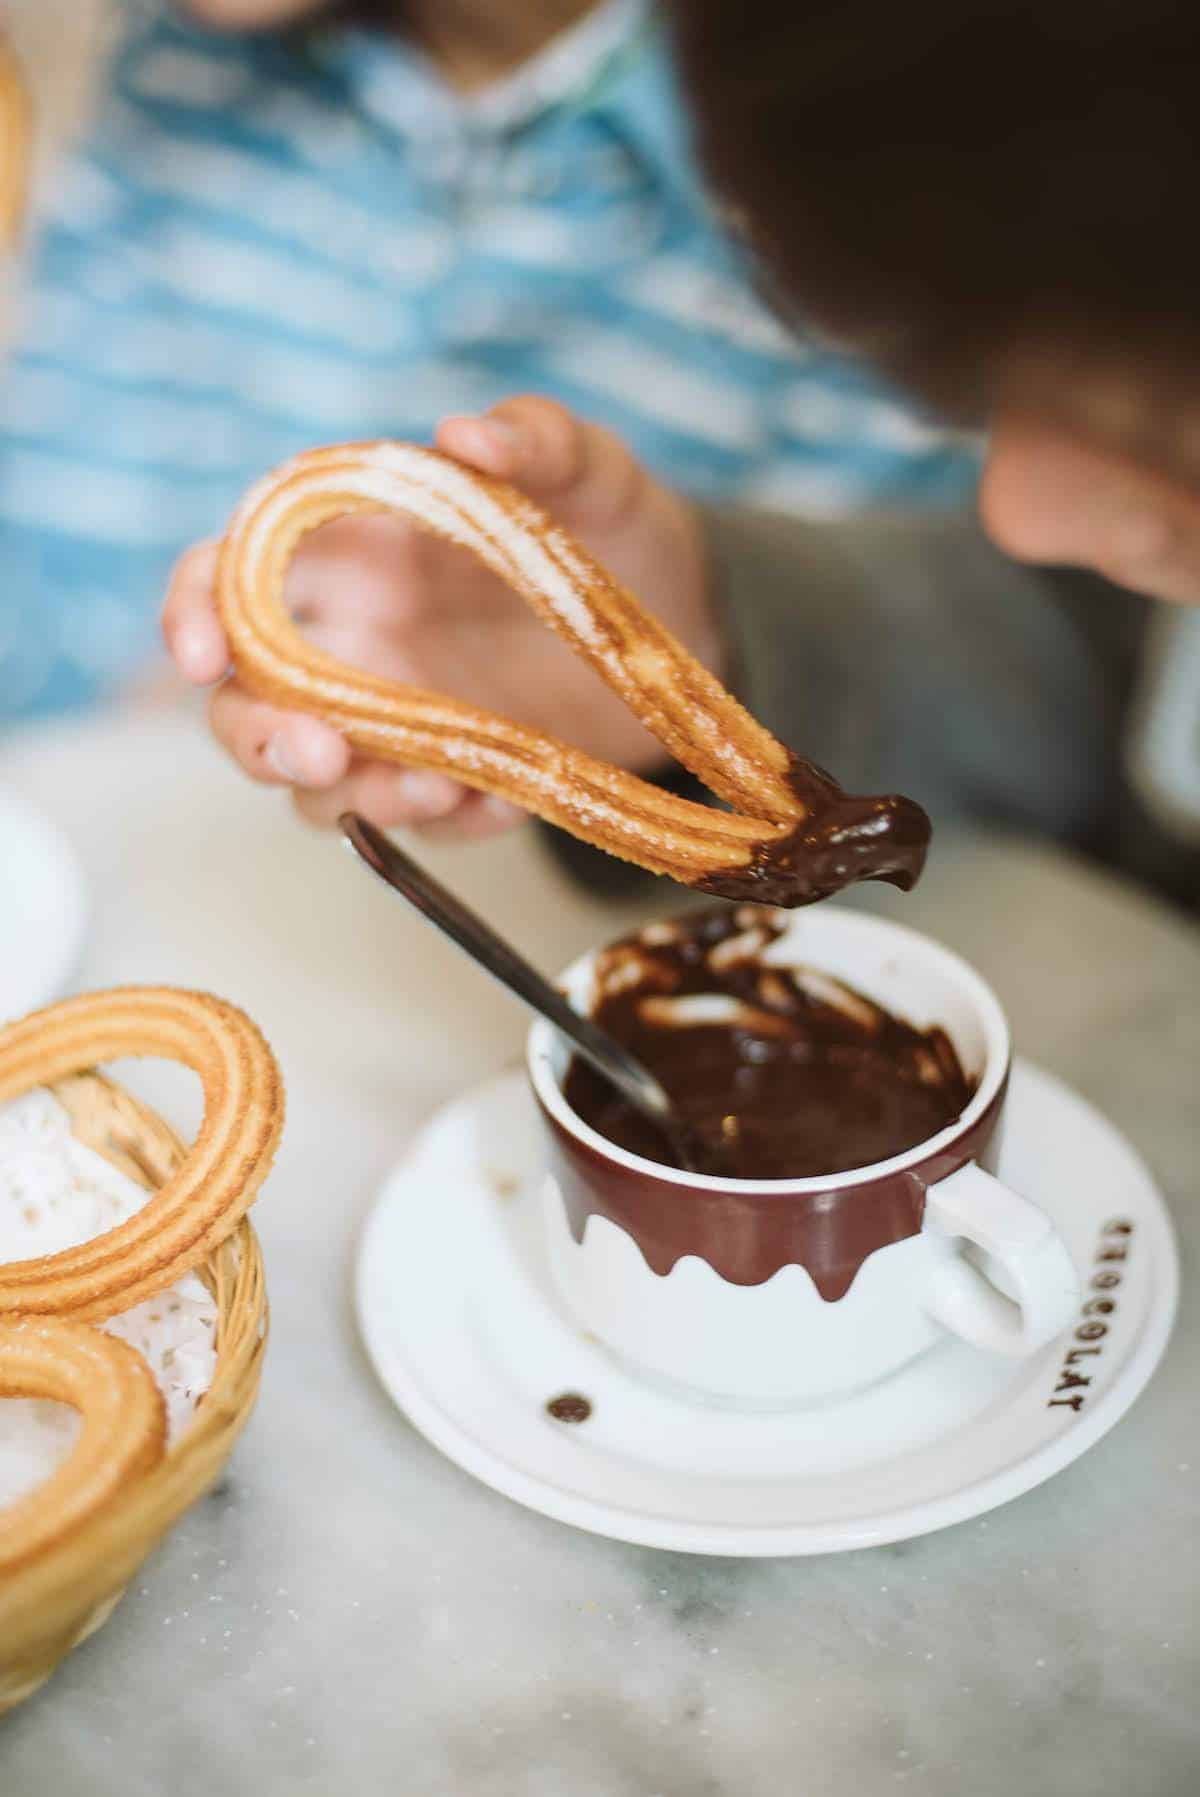 Close-up of a thin, looped churro being dipped into a mug of thick Spanish hot chocolate.